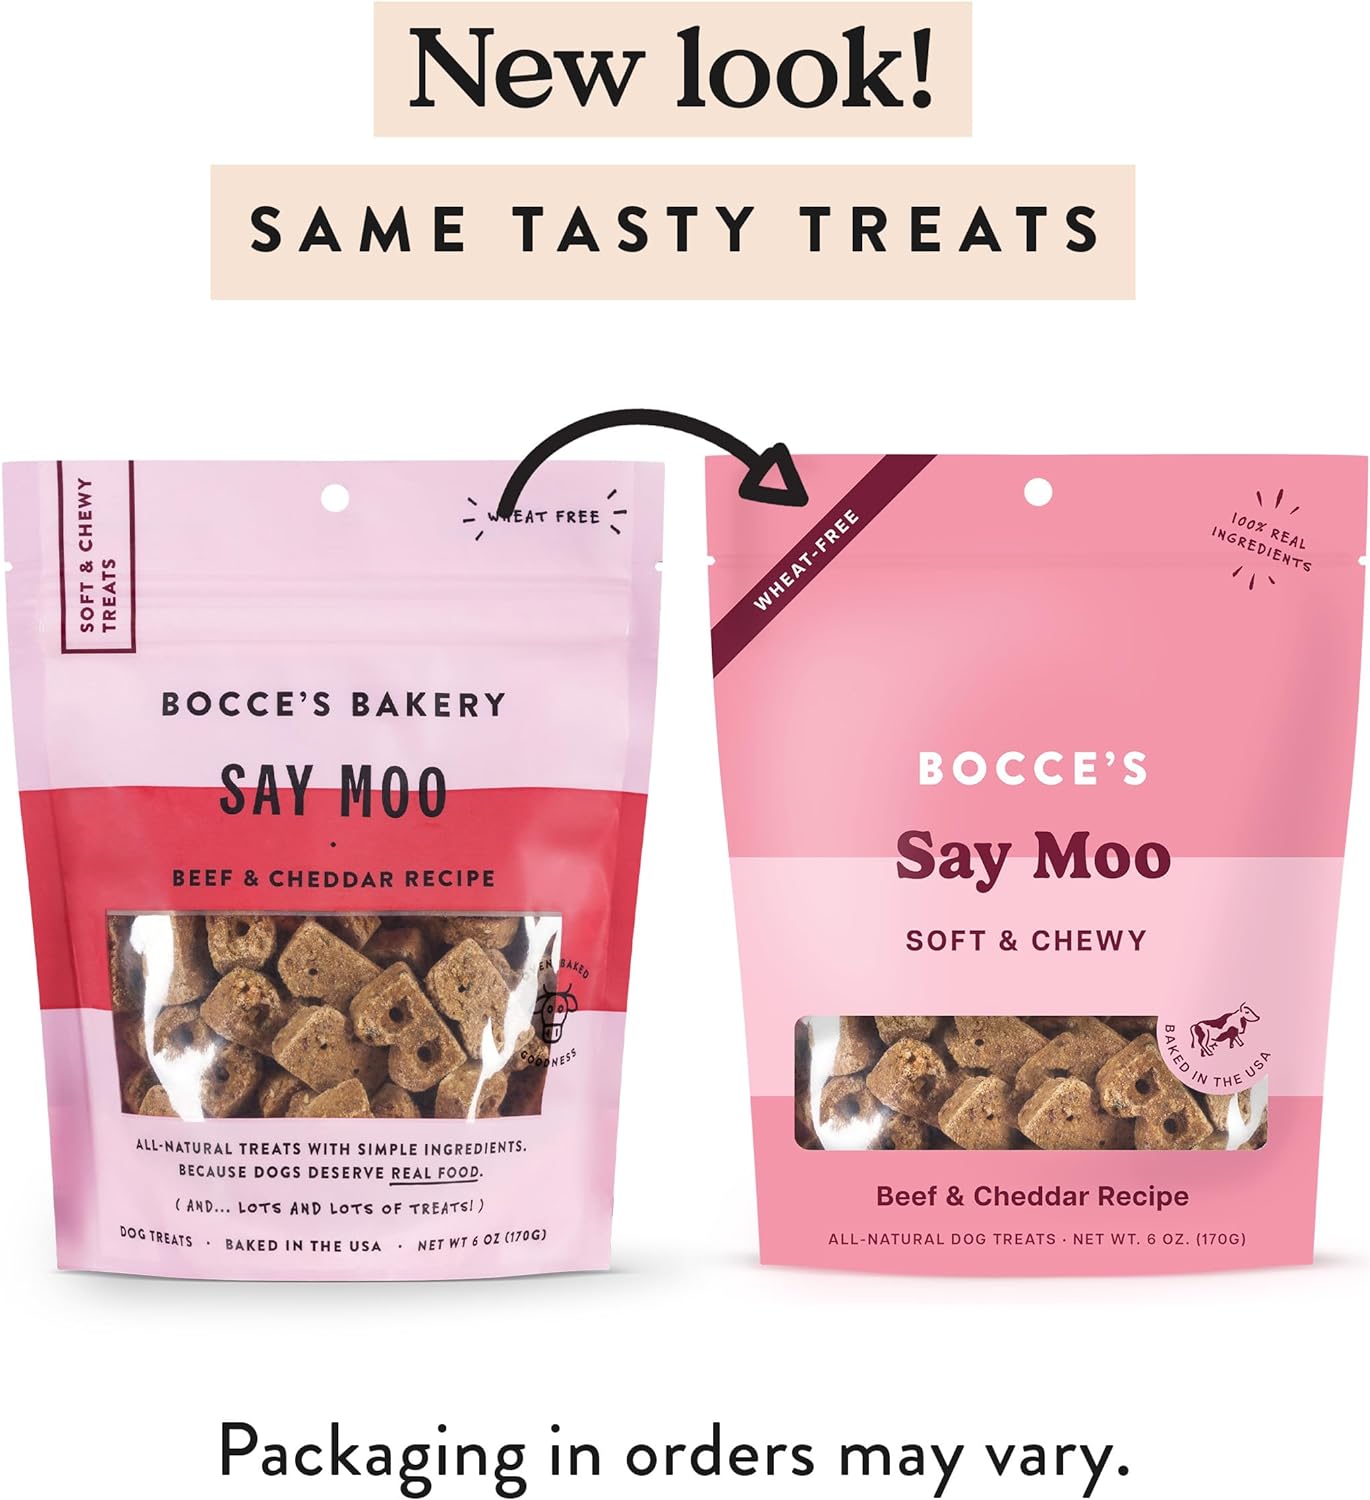 Bocces Bakery Oven Baked Say Moo Treats for Dogs, Wheat-Free Everyday Dog Treats, Made with Real Ingredients, Baked in The USA, All-Natural Soft  Chewy Cookies, Beef  Cheddar Recipe, 6 oz